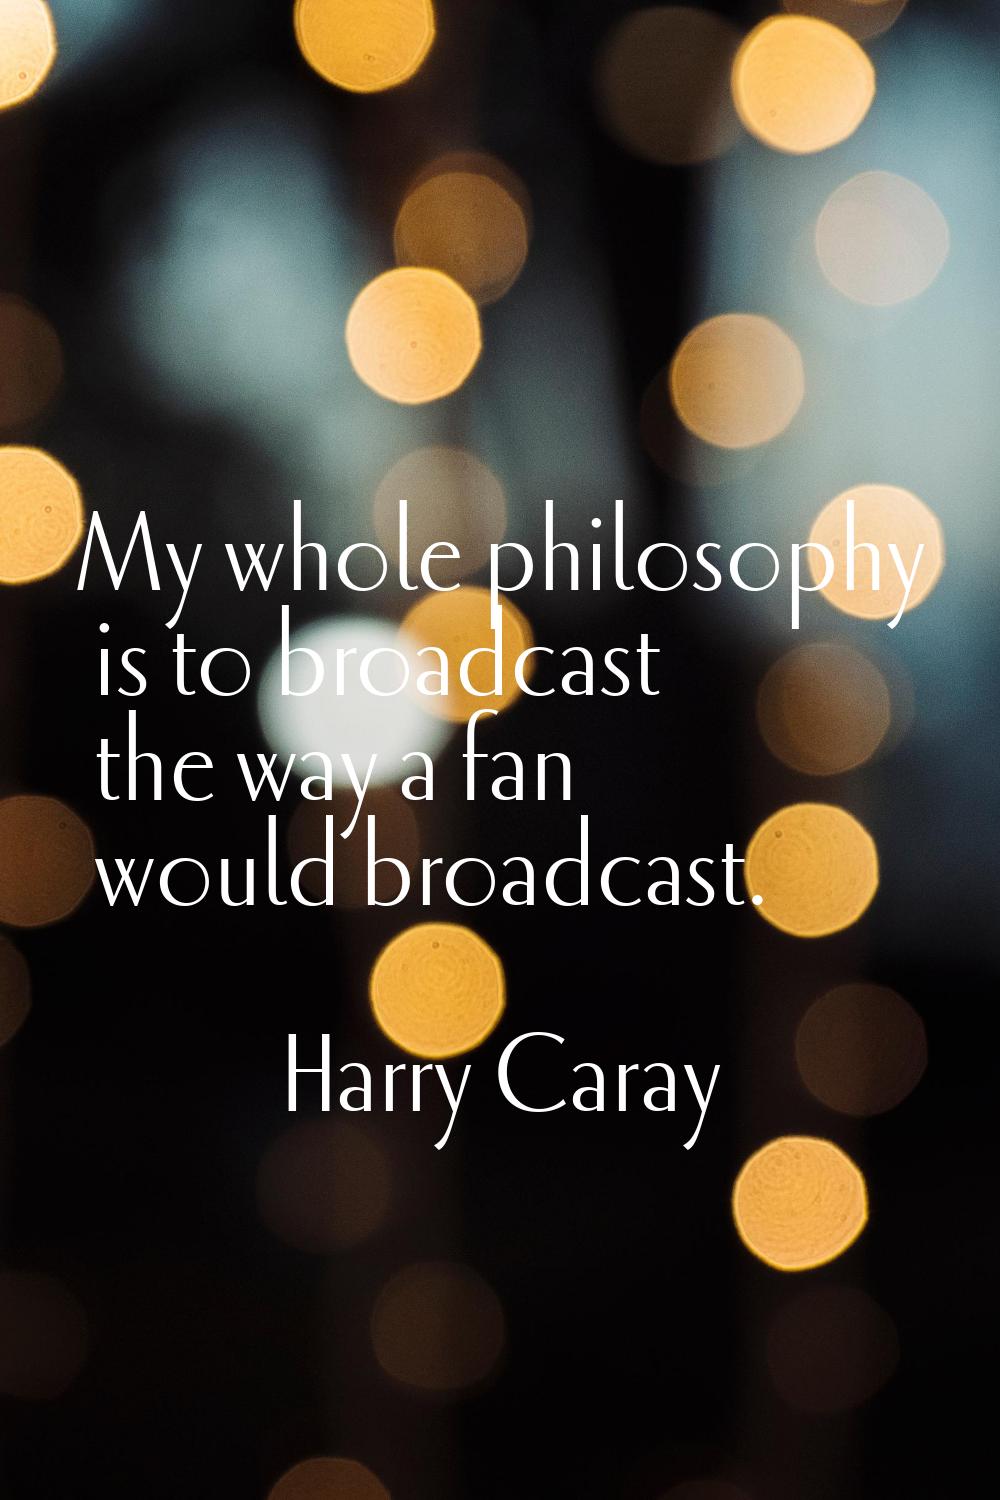 My whole philosophy is to broadcast the way a fan would broadcast.